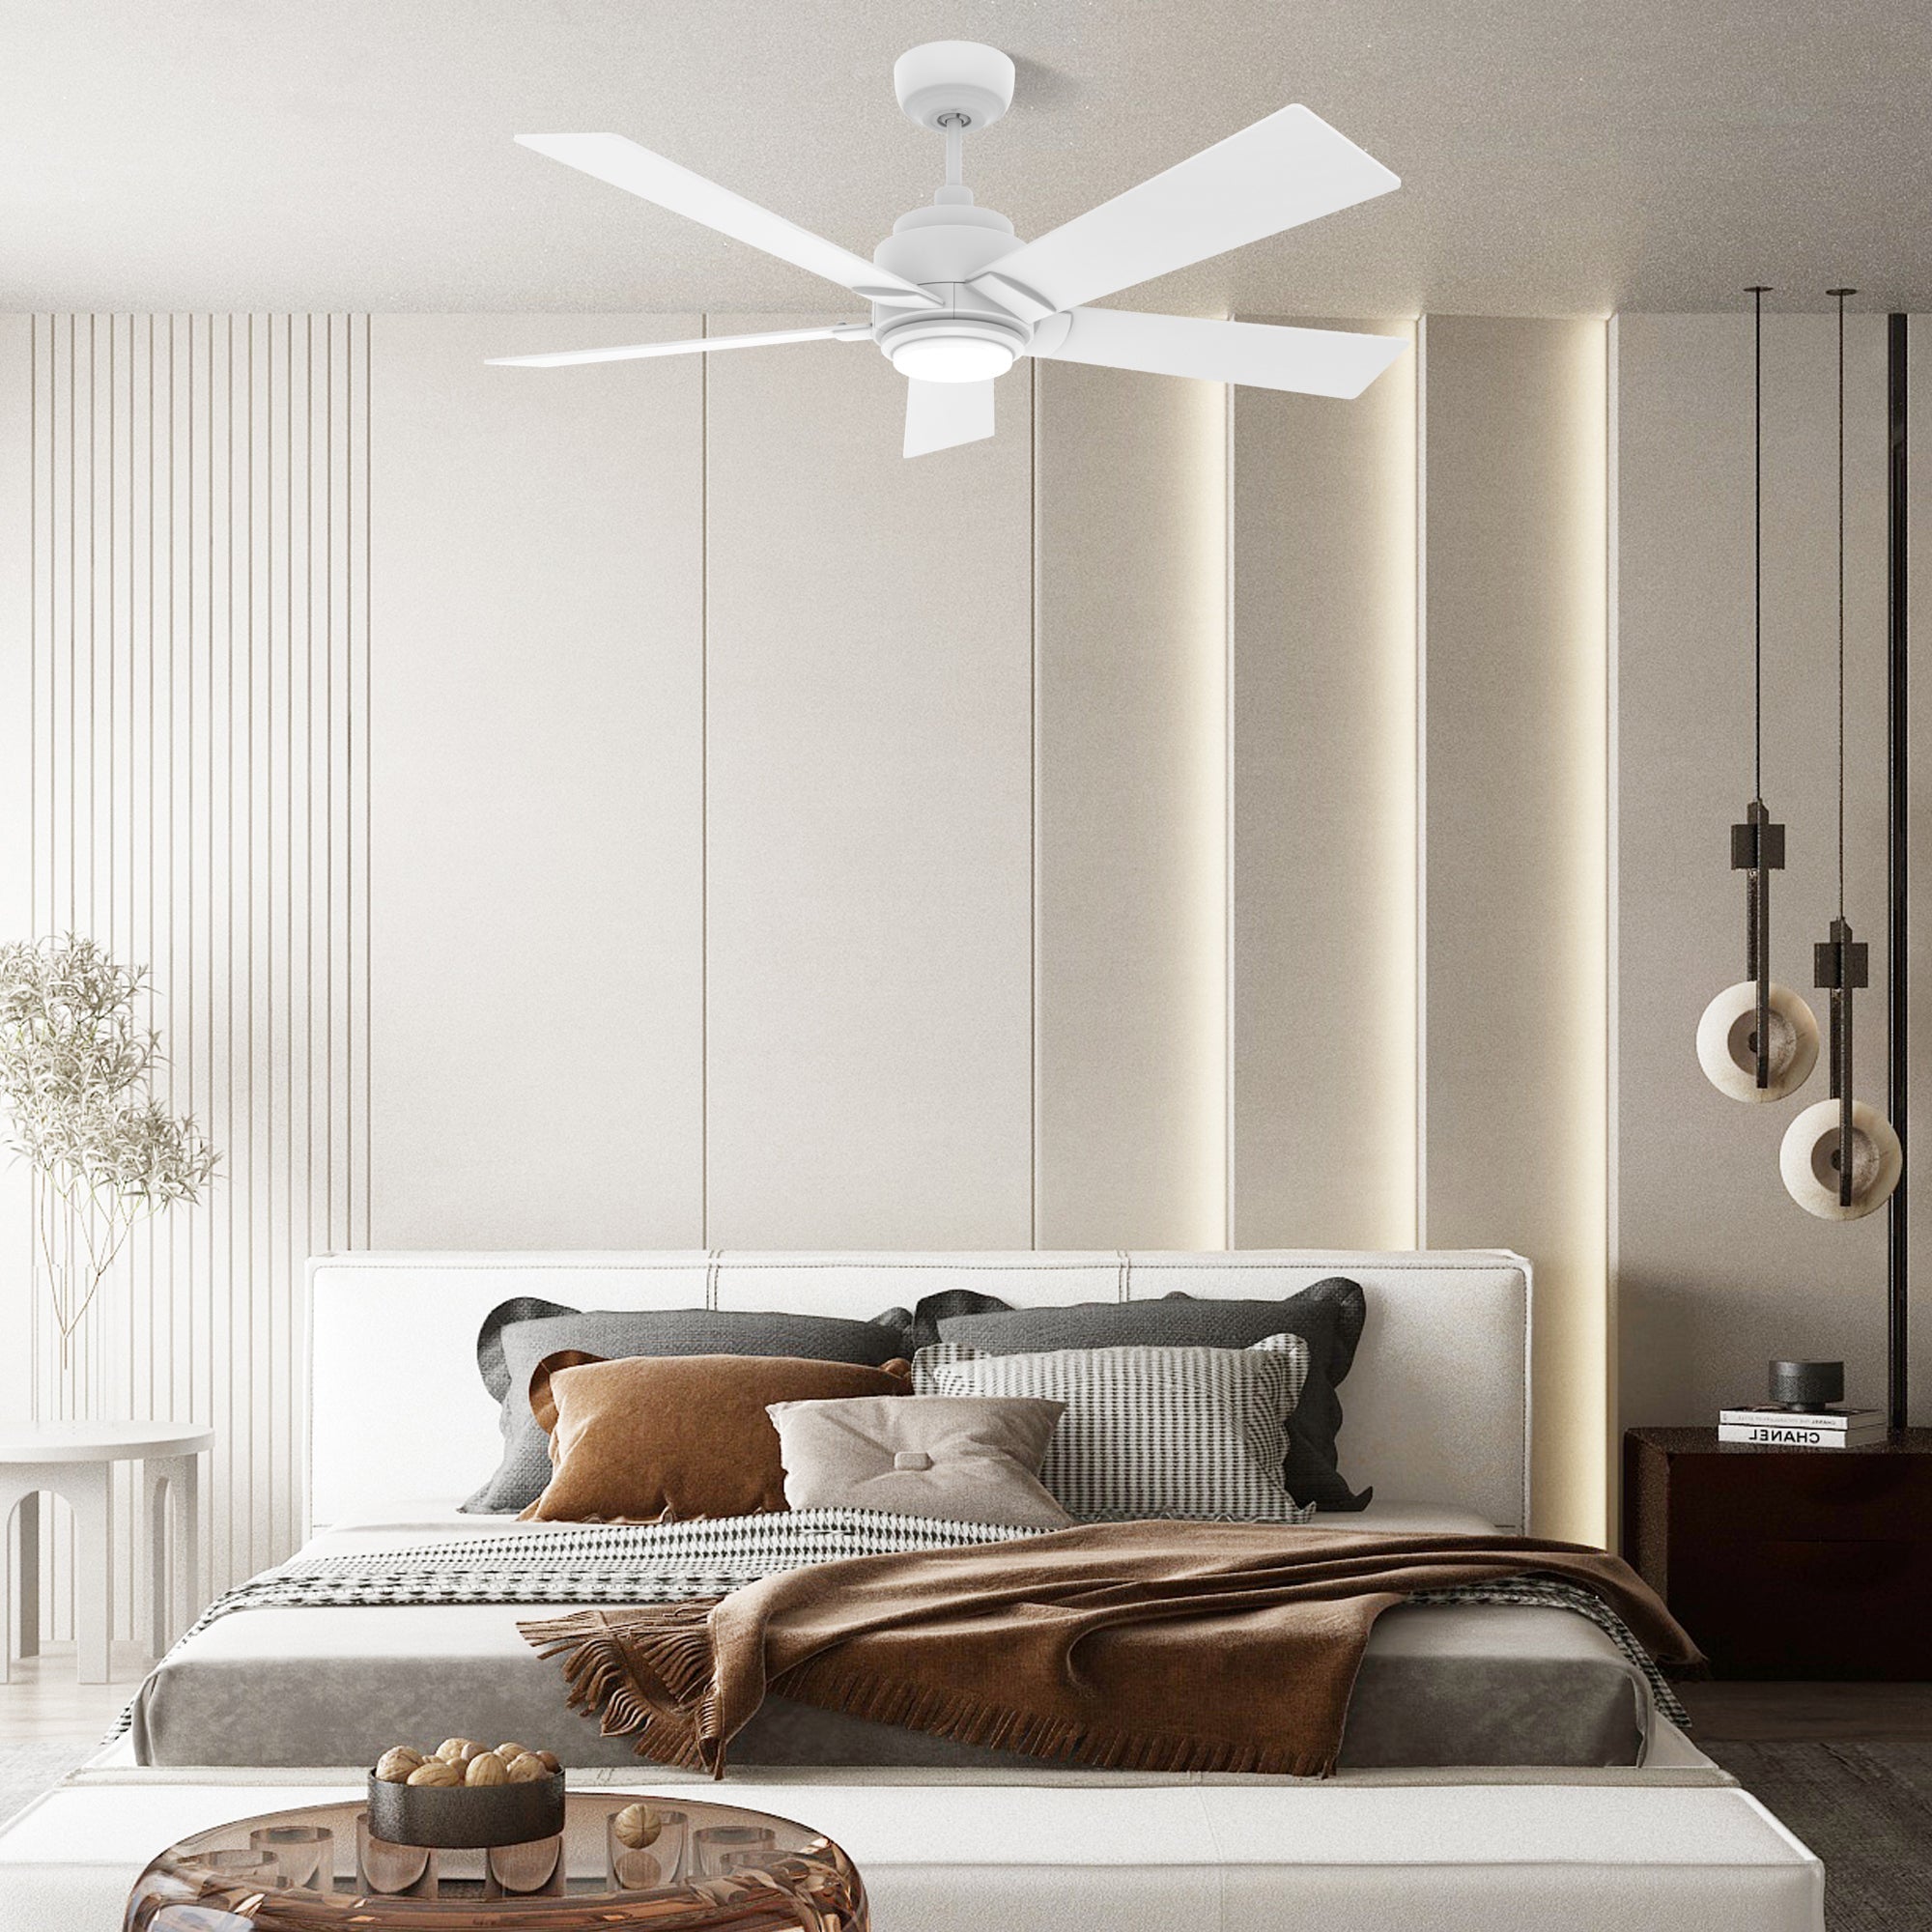 This Aspen 48&#39;&#39; smart ceiling fan keeps your space cool, bright, and stylish. It is a soft modern masterpiece perfect for your large indoor living spaces. This Wifi smart ceiling fan is a simplicity designing with White finish, use elegant Plywood blades and has an integrated 4000K LED cool light. The fan features Remote control, Wi-Fi apps, Siri Shortcut and Voice control technology (compatible with Amazon Alexa and Google Home Assistant ) to set fan preferences. 